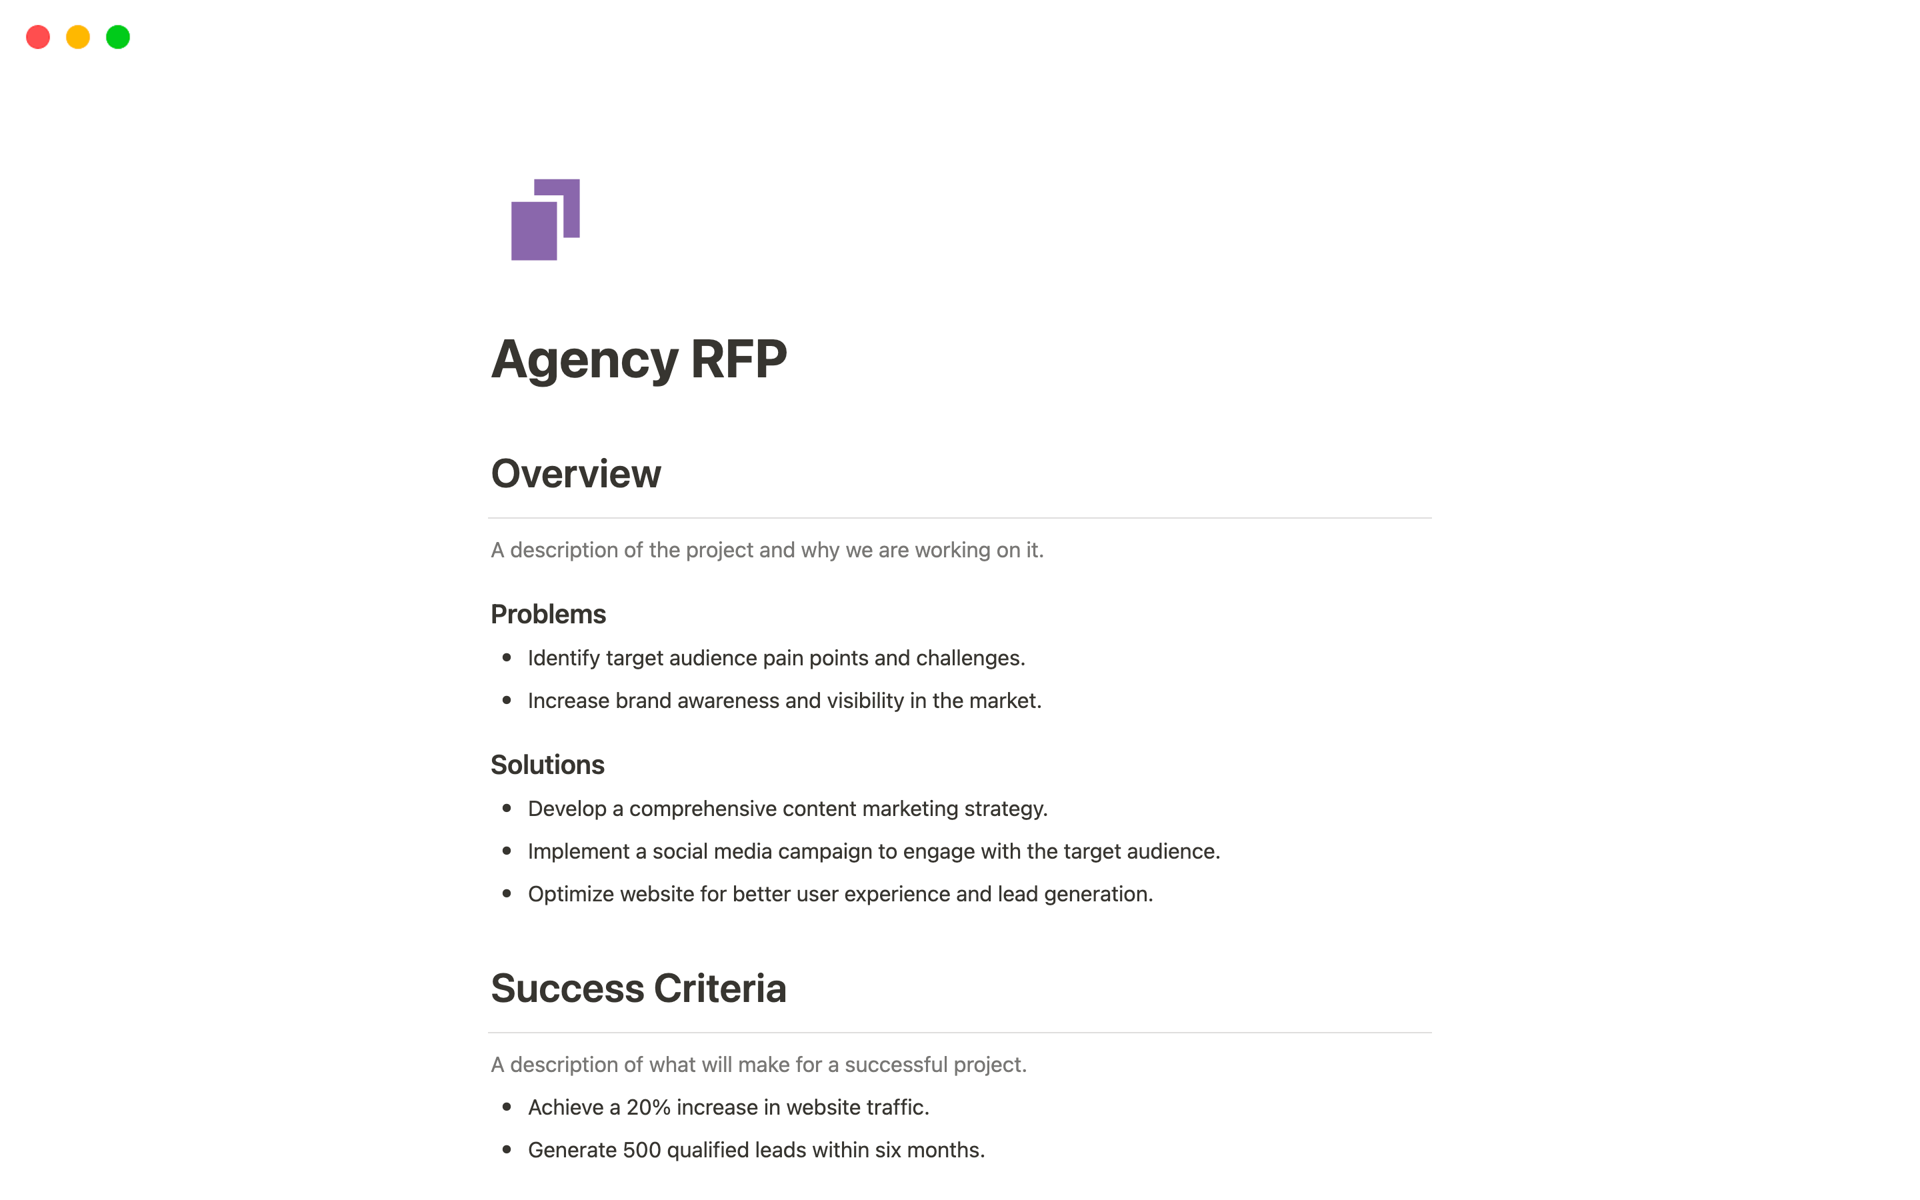 Agency RFP Notion Template